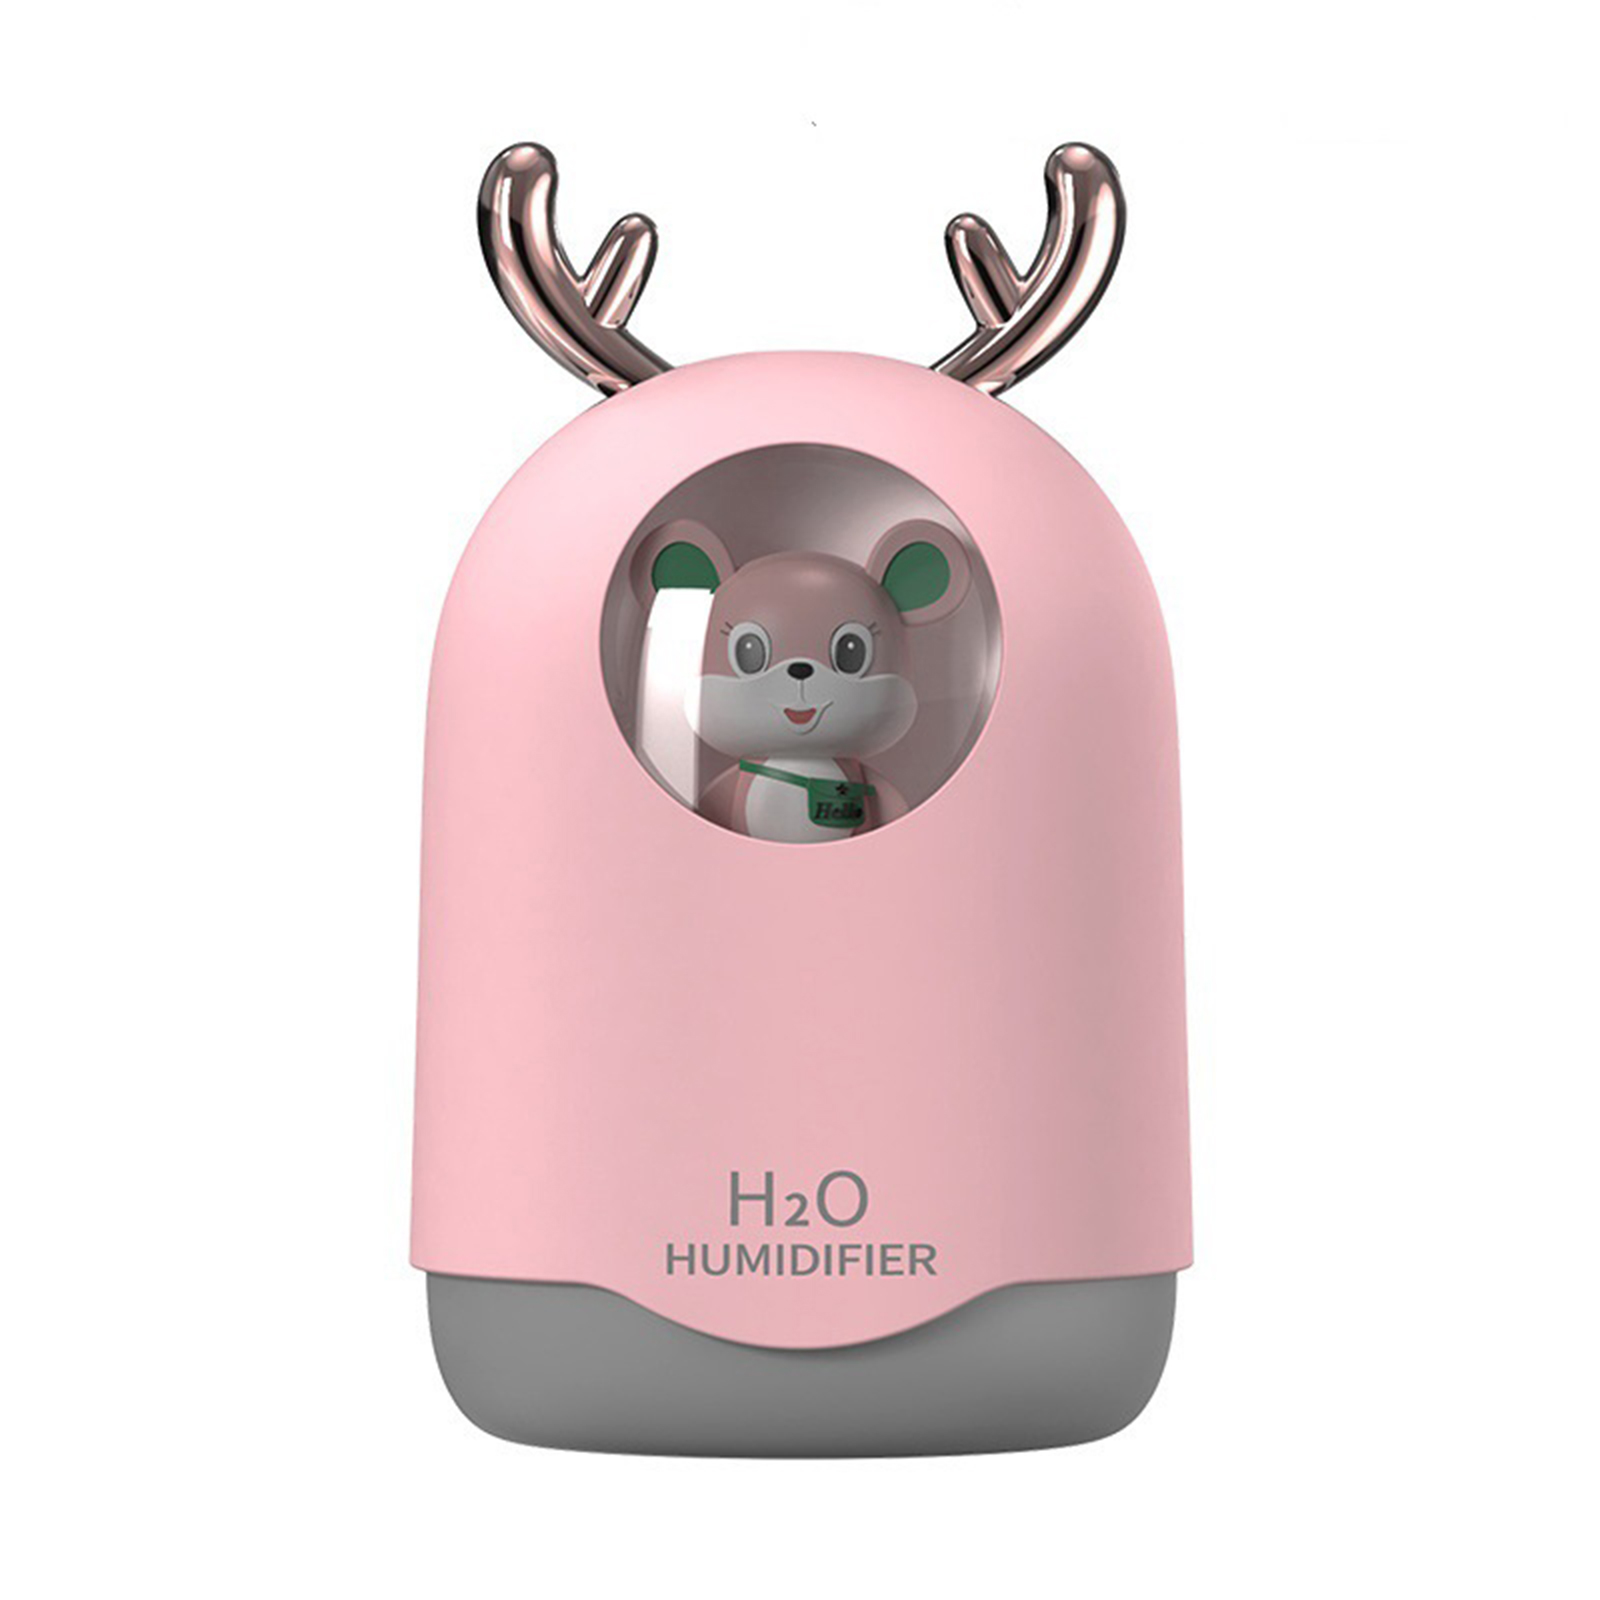 Usb Elk Shape Mini Humidifier Aroma Essential Oil Diffuser Night Light With 300ml Water Tank For Home Office Bedroom